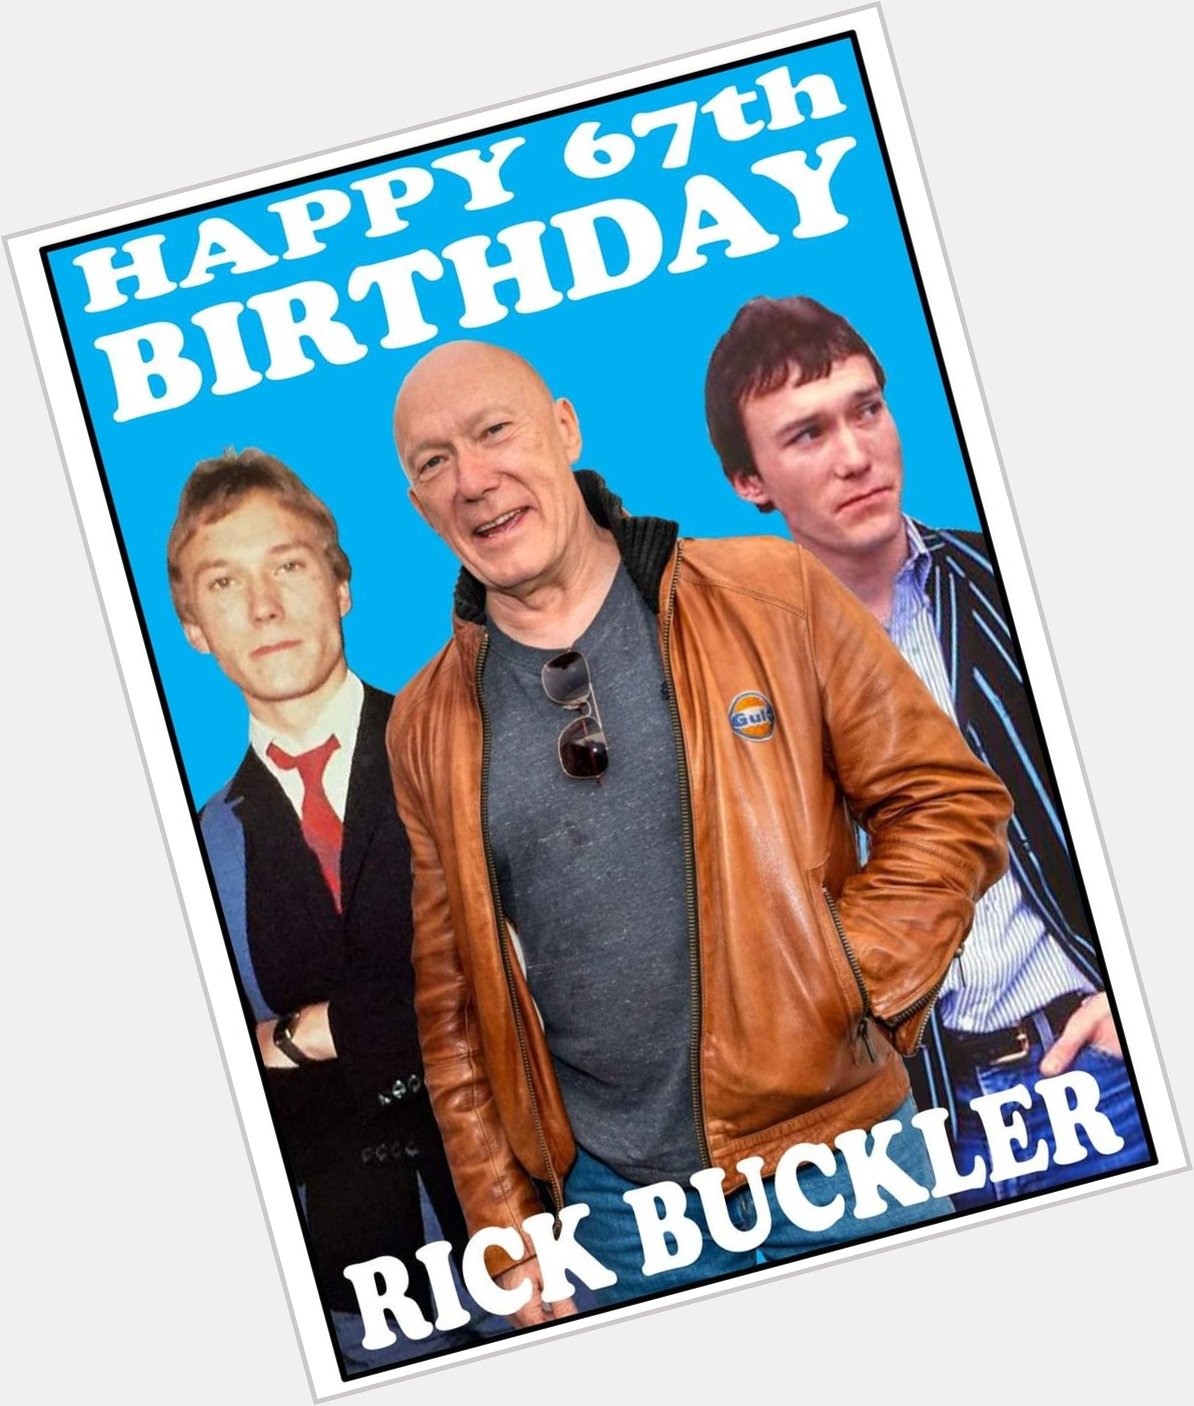 Happy birthday to the man with the sticks, Rick Buckler 